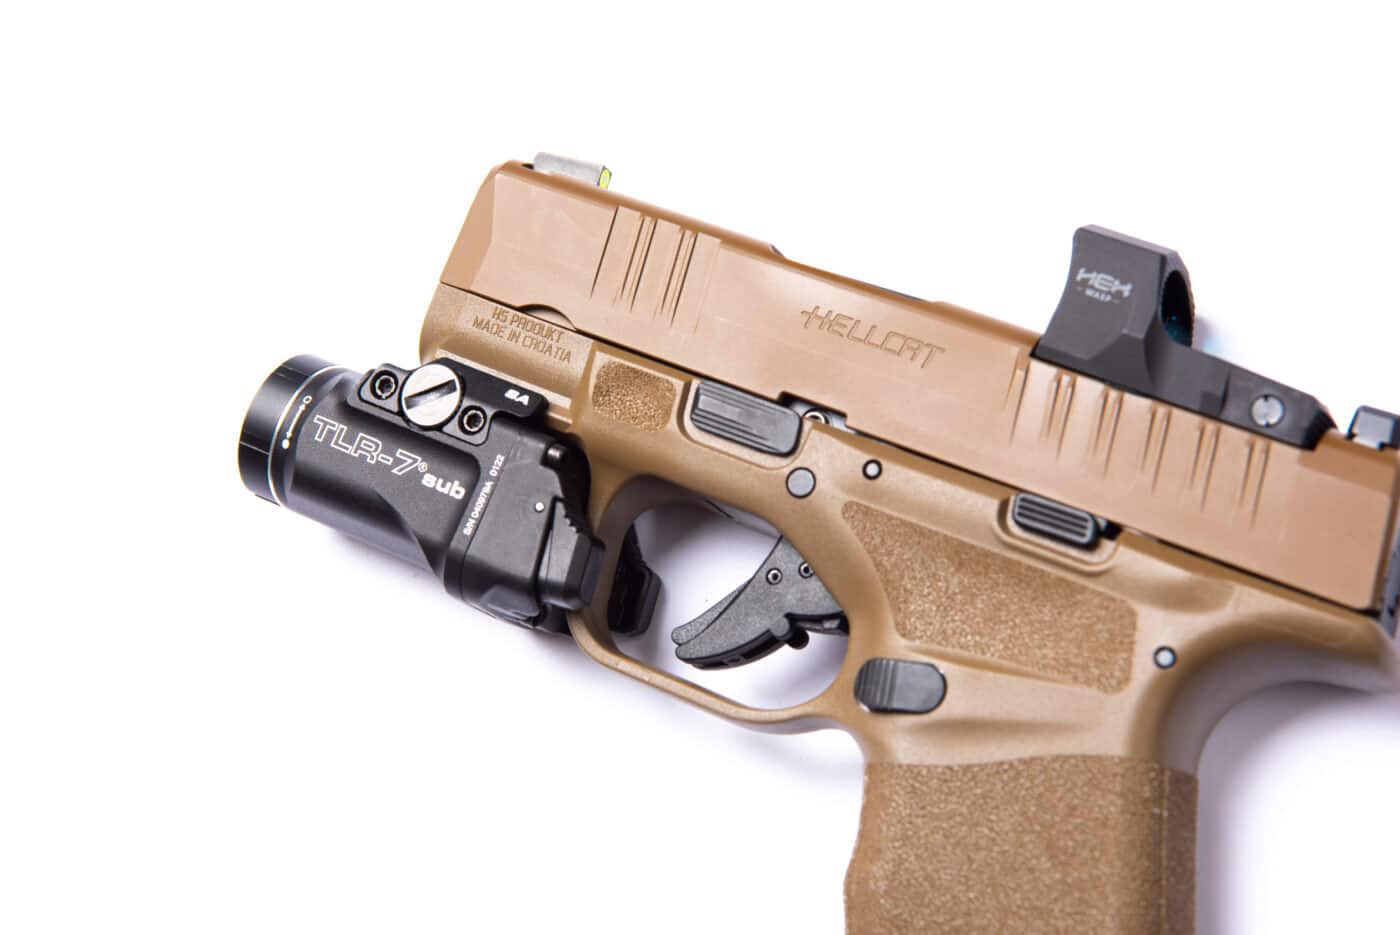 TLR-7 Sub with programable light operation mounted to Hellcat pistol